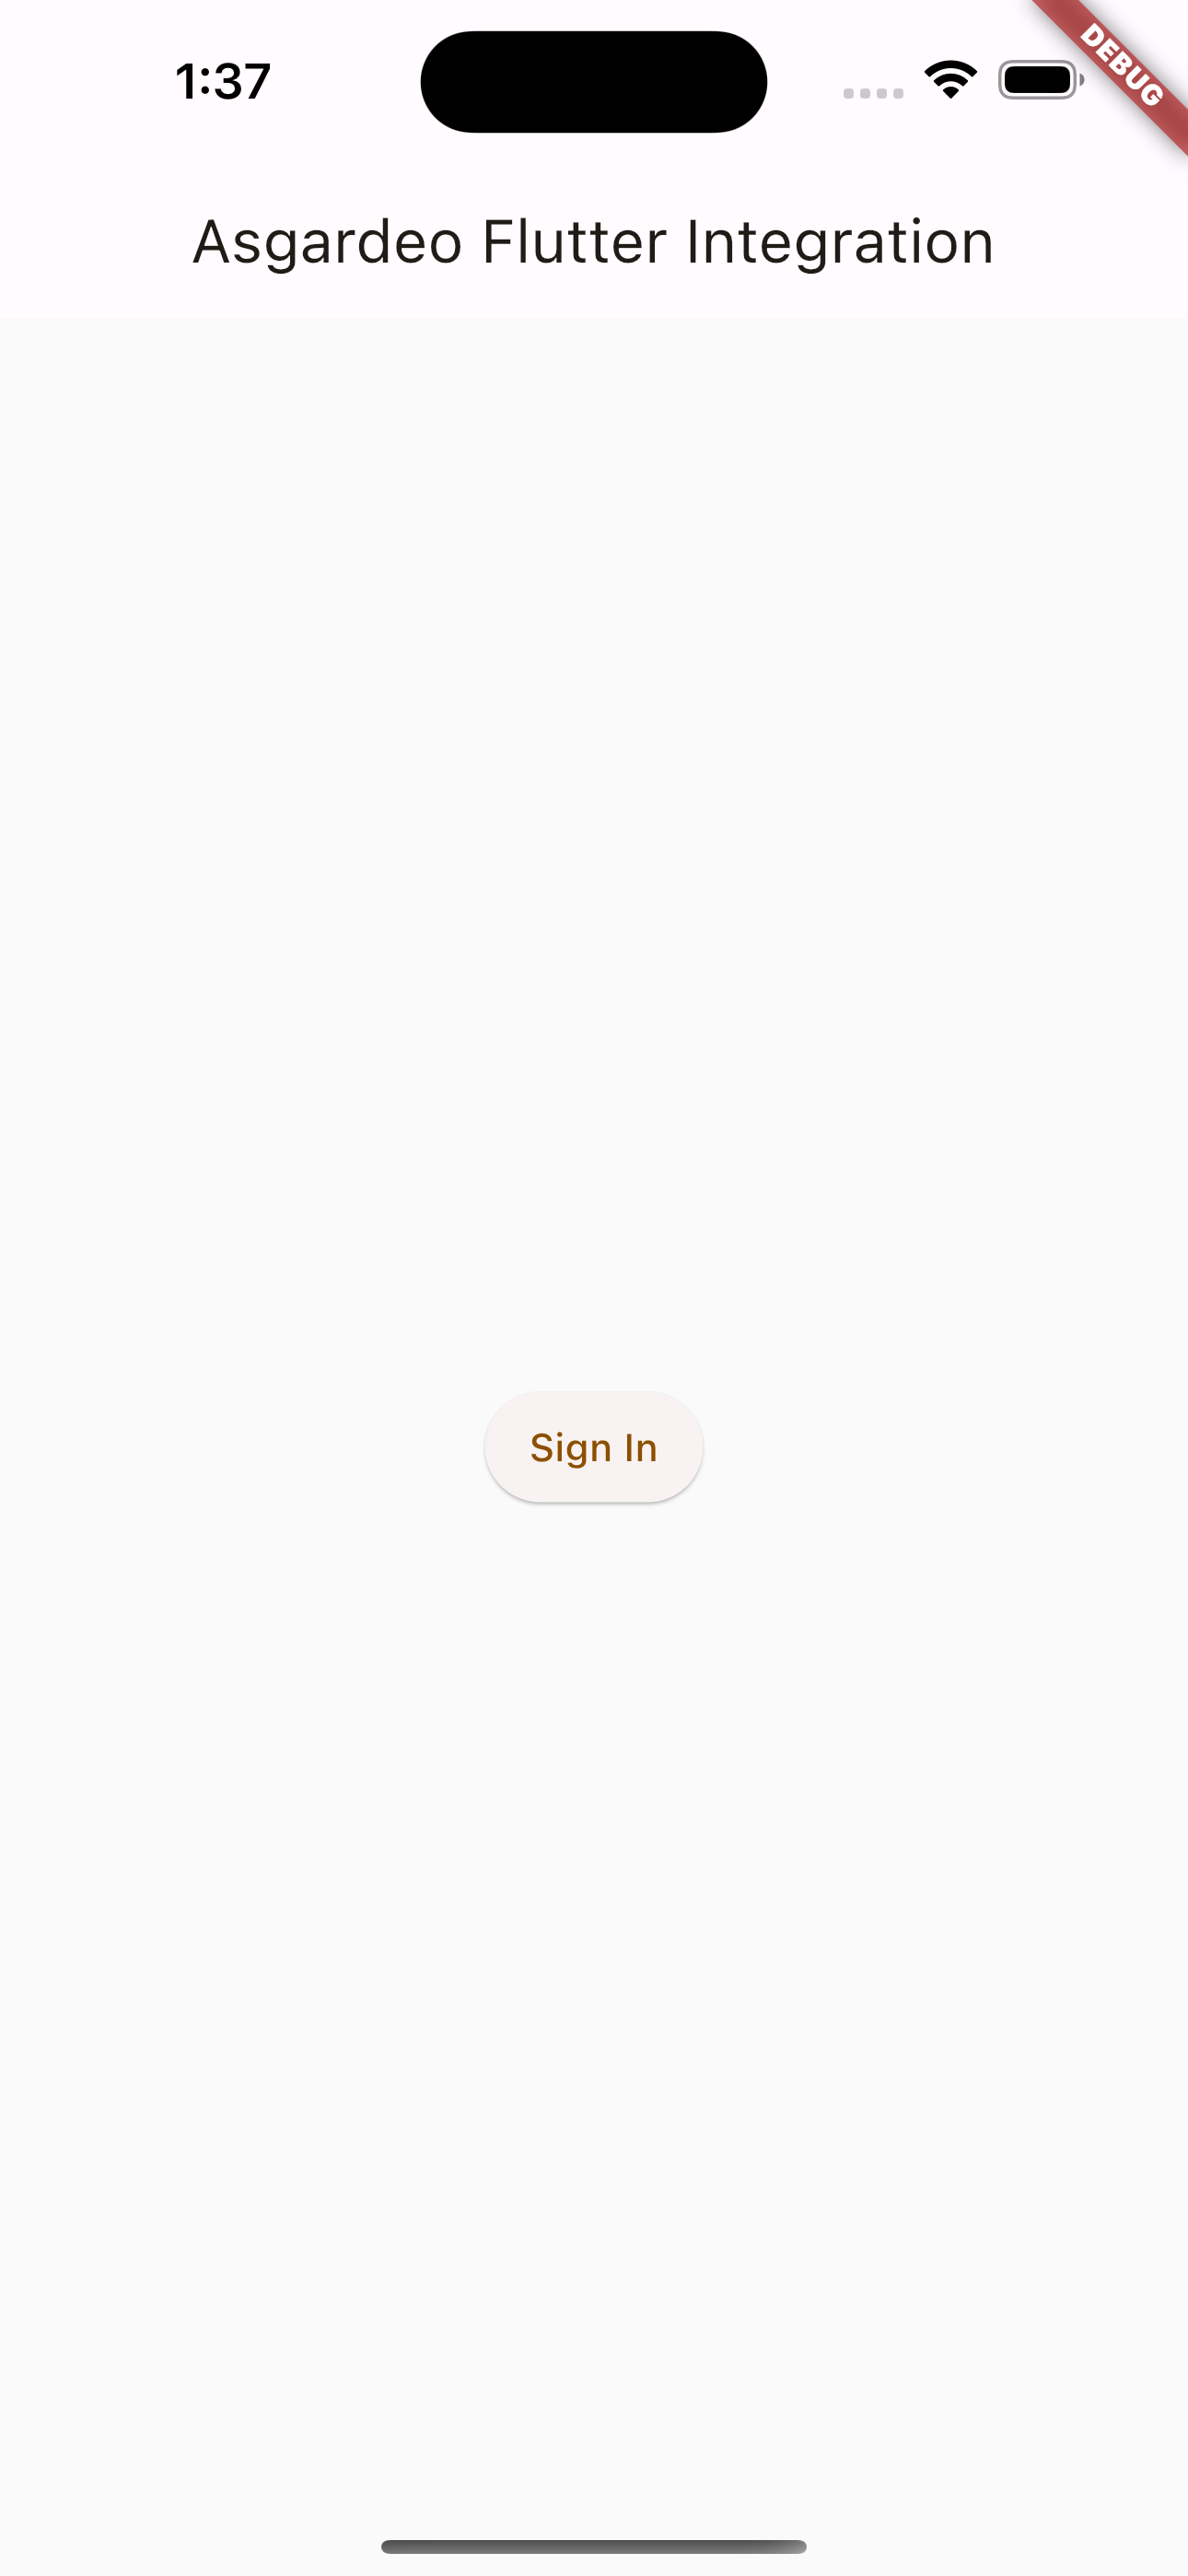 sign-in page of the Flutter app